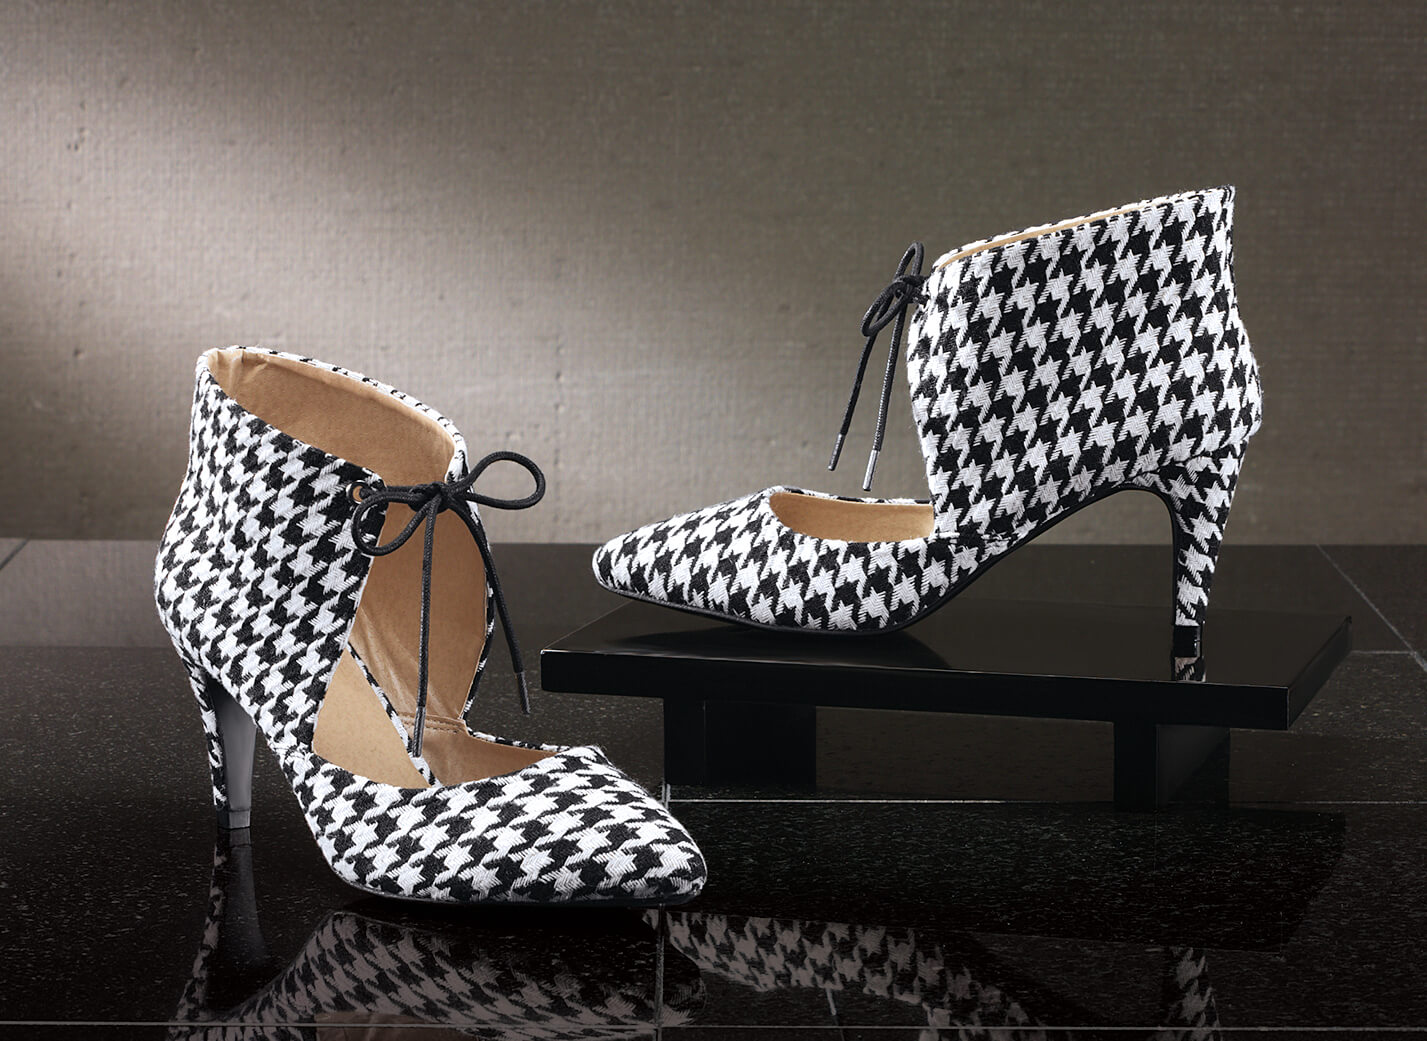 Covered in a black-and-white houndstooth print from heel to pointed toe, this tie-front shoe makes a bold statement.